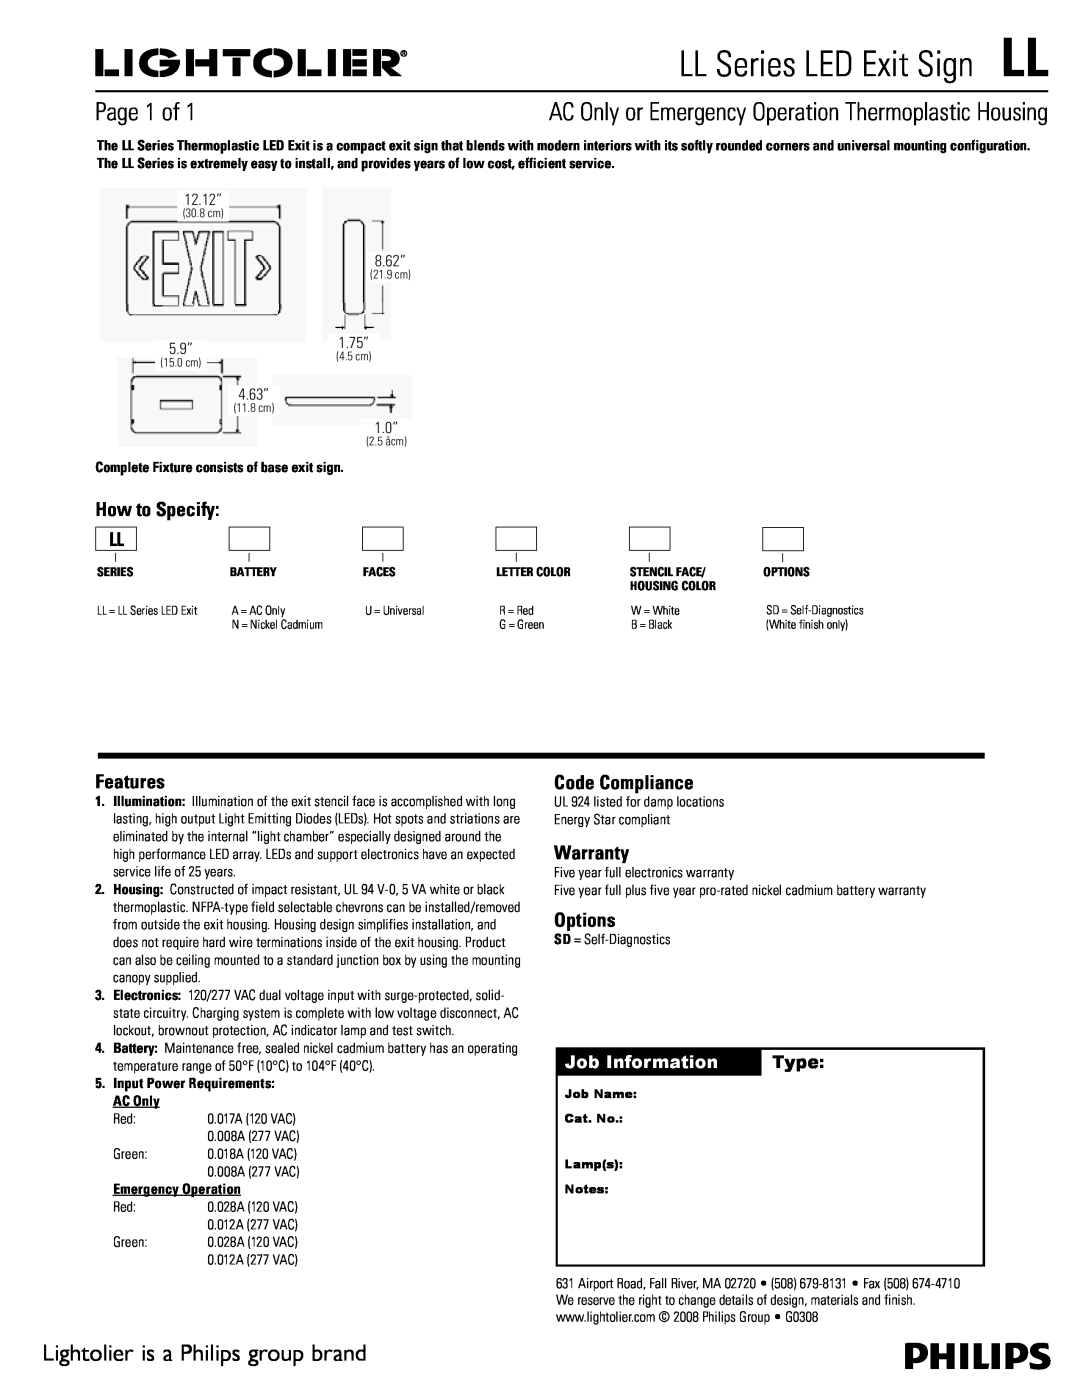 Lightolier warranty LL Series LED Exit SignLL, Page 1 of, Lightolier is a Philips group brand, How to Specify LL, Type 